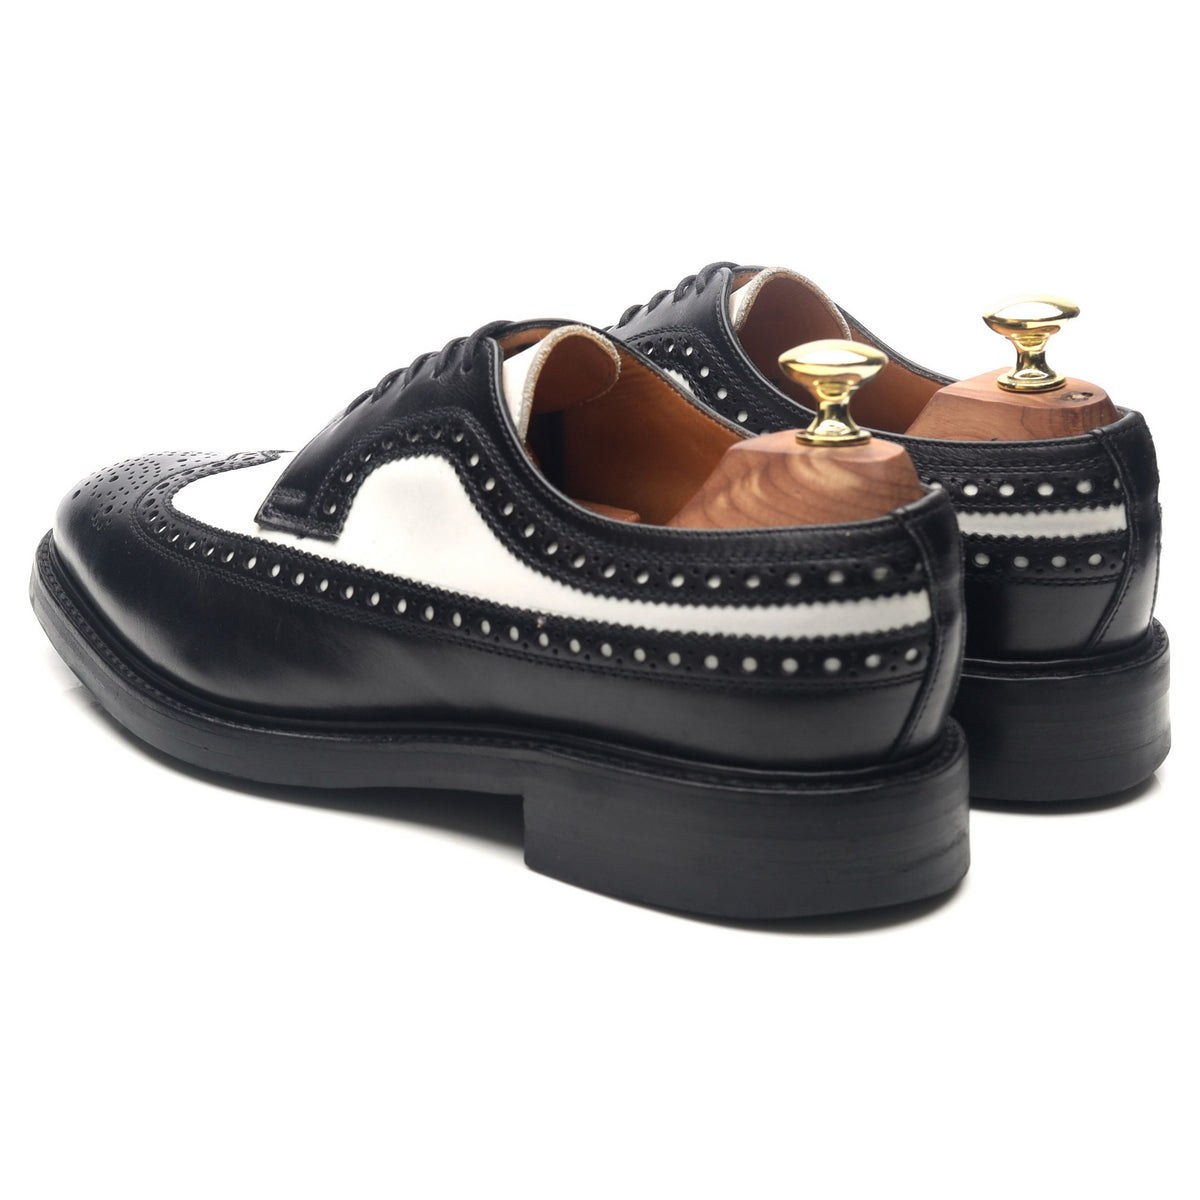 Black White Leather Two Tone Derby Brogues UK 7 F